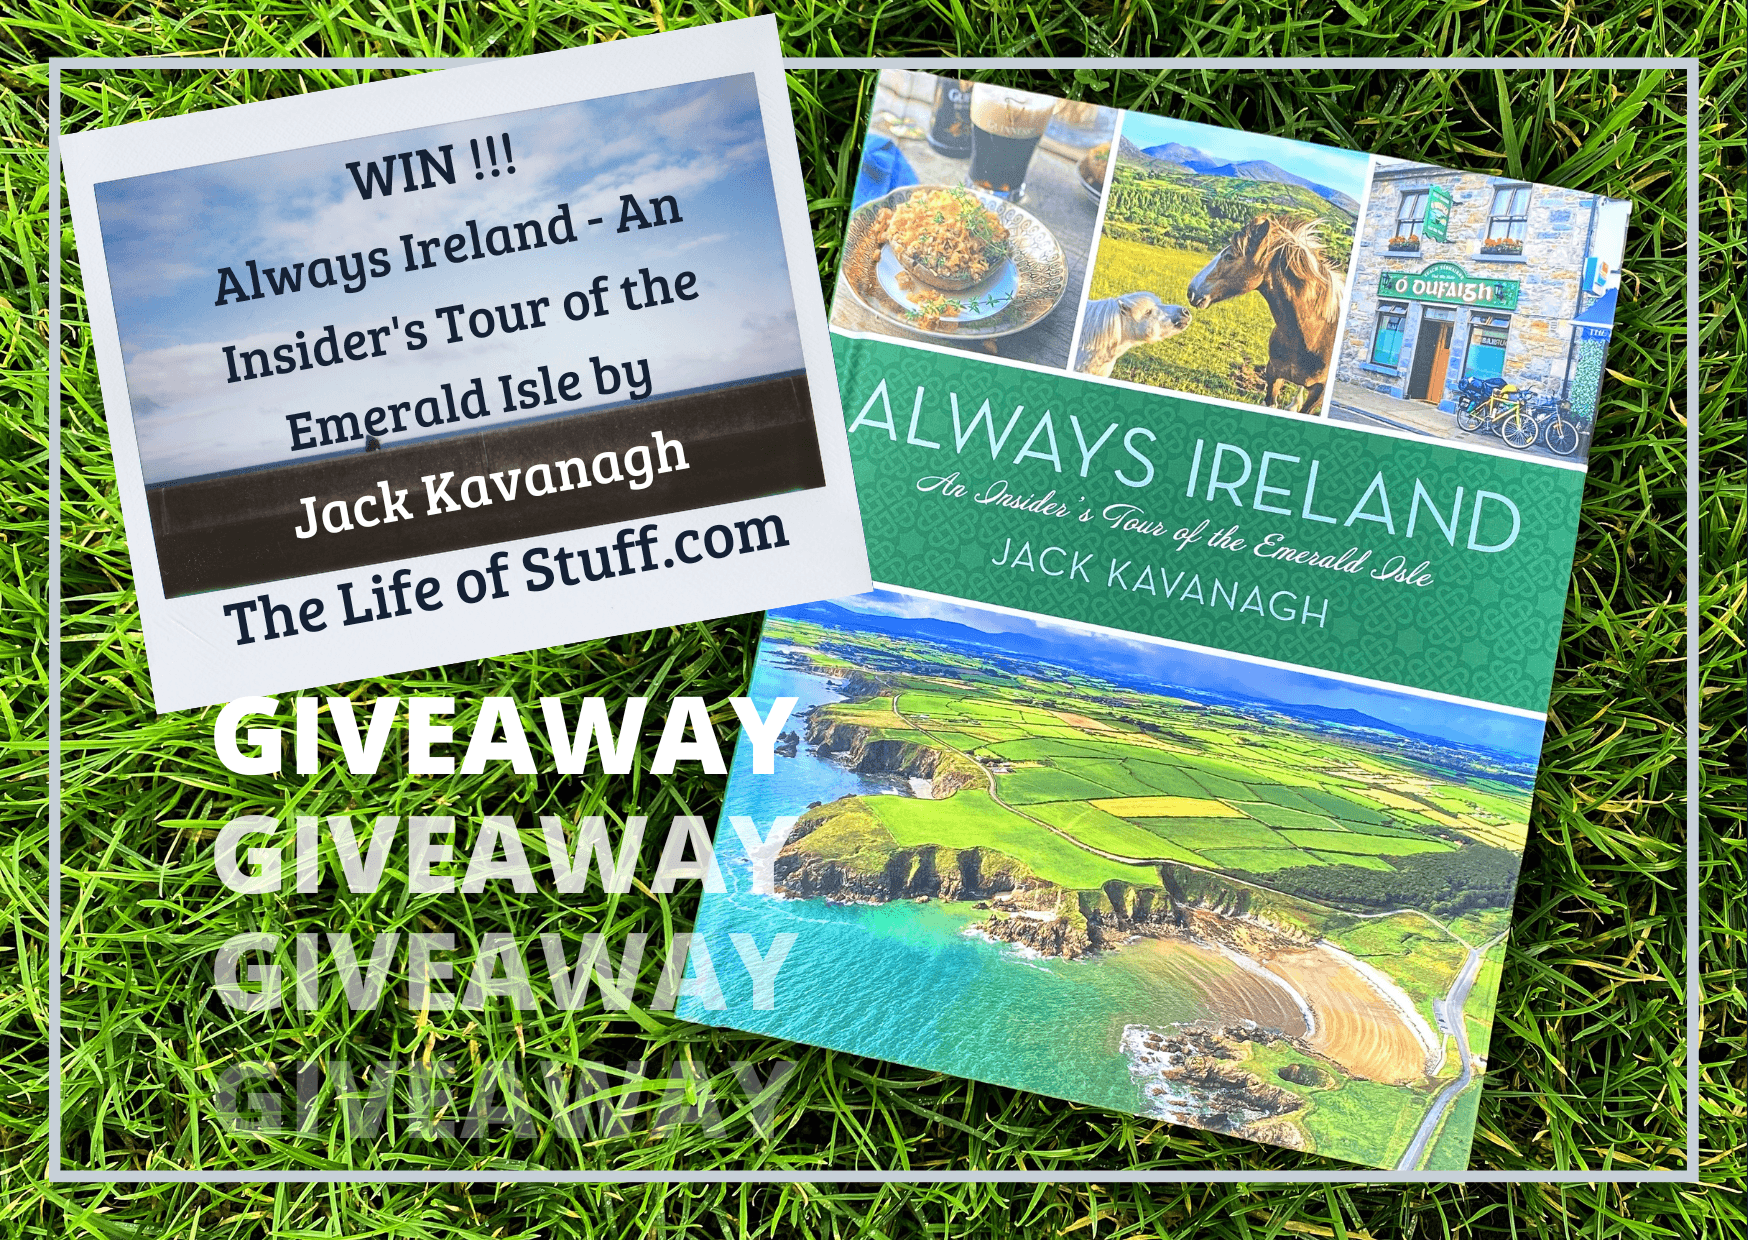 WIN Always Ireland - An Insider's Tour of the Emerald Isle - The Life of Stuff